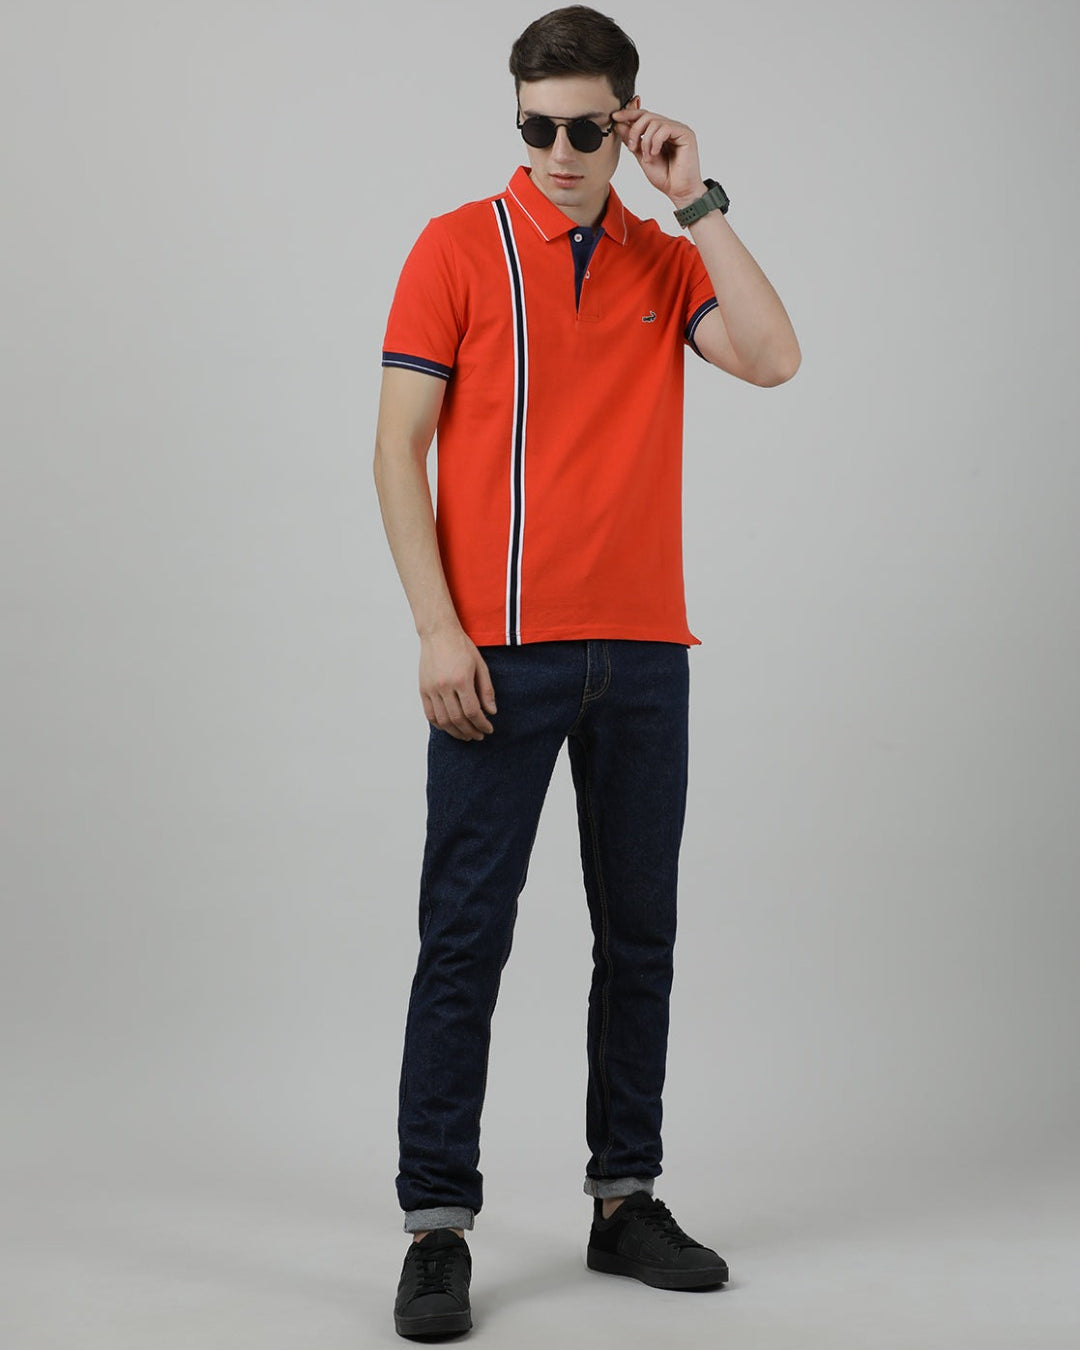 Crocodile Casual Red Solid Polo T-Shirt Half Sleeve Slim Fit with Collar for Men